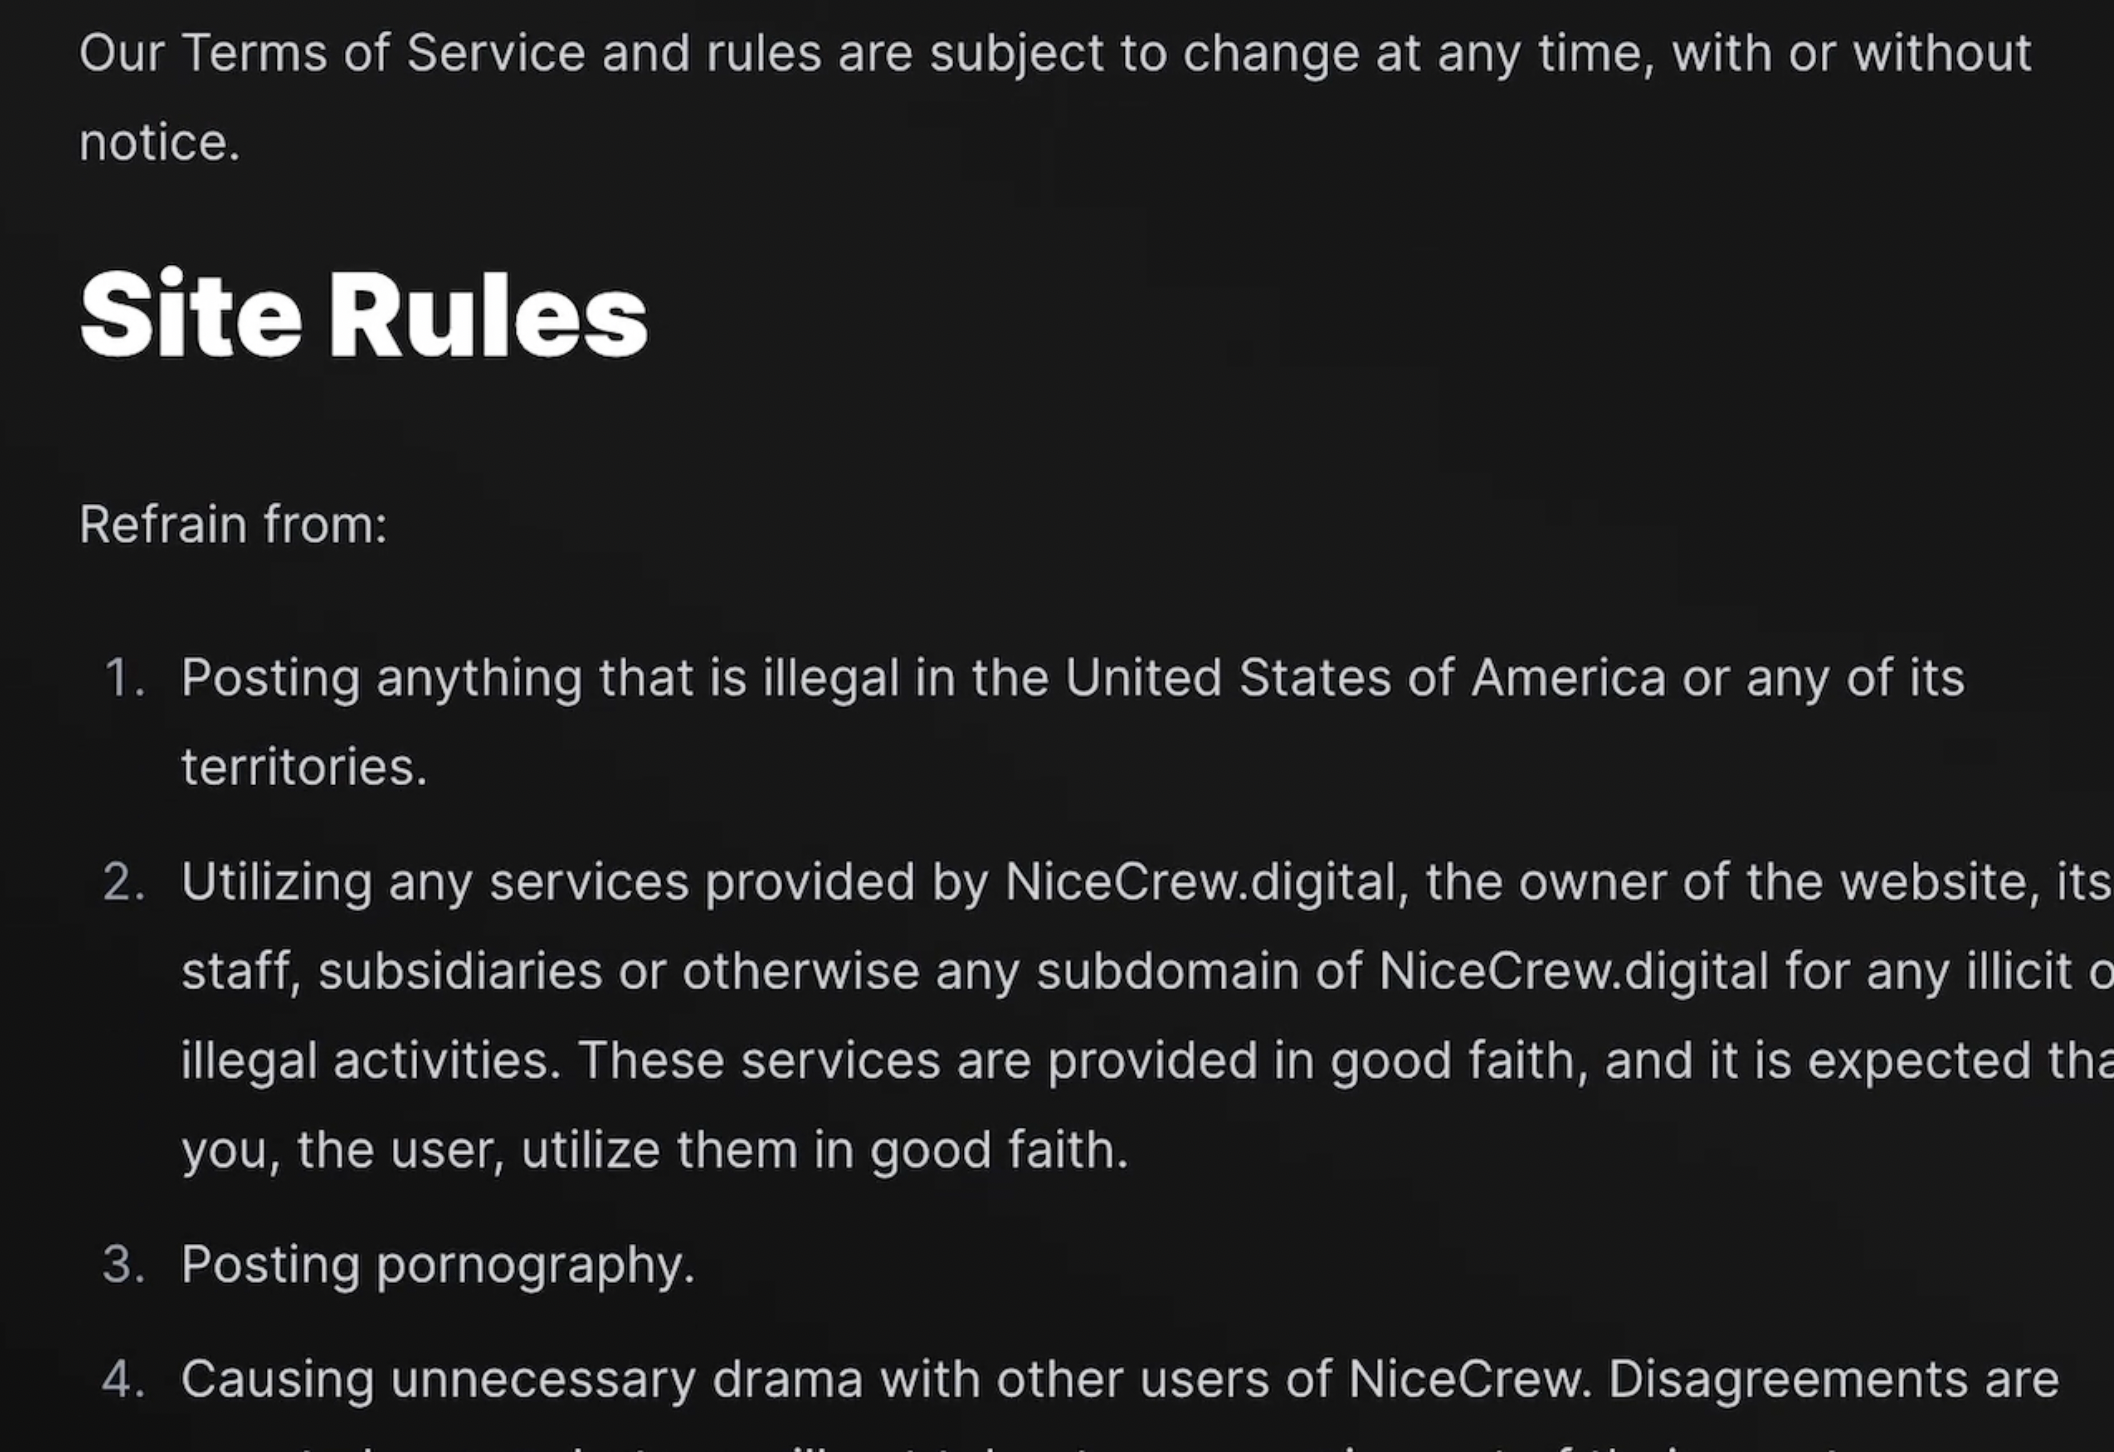 Screenshot of "Site Rules" from Nicecrew.digital's Poast instance. Site rules include refraining from "posting anything illegal," "utilizing services for illicit illegal activities," posting porn, and "causing unnecessary drama"